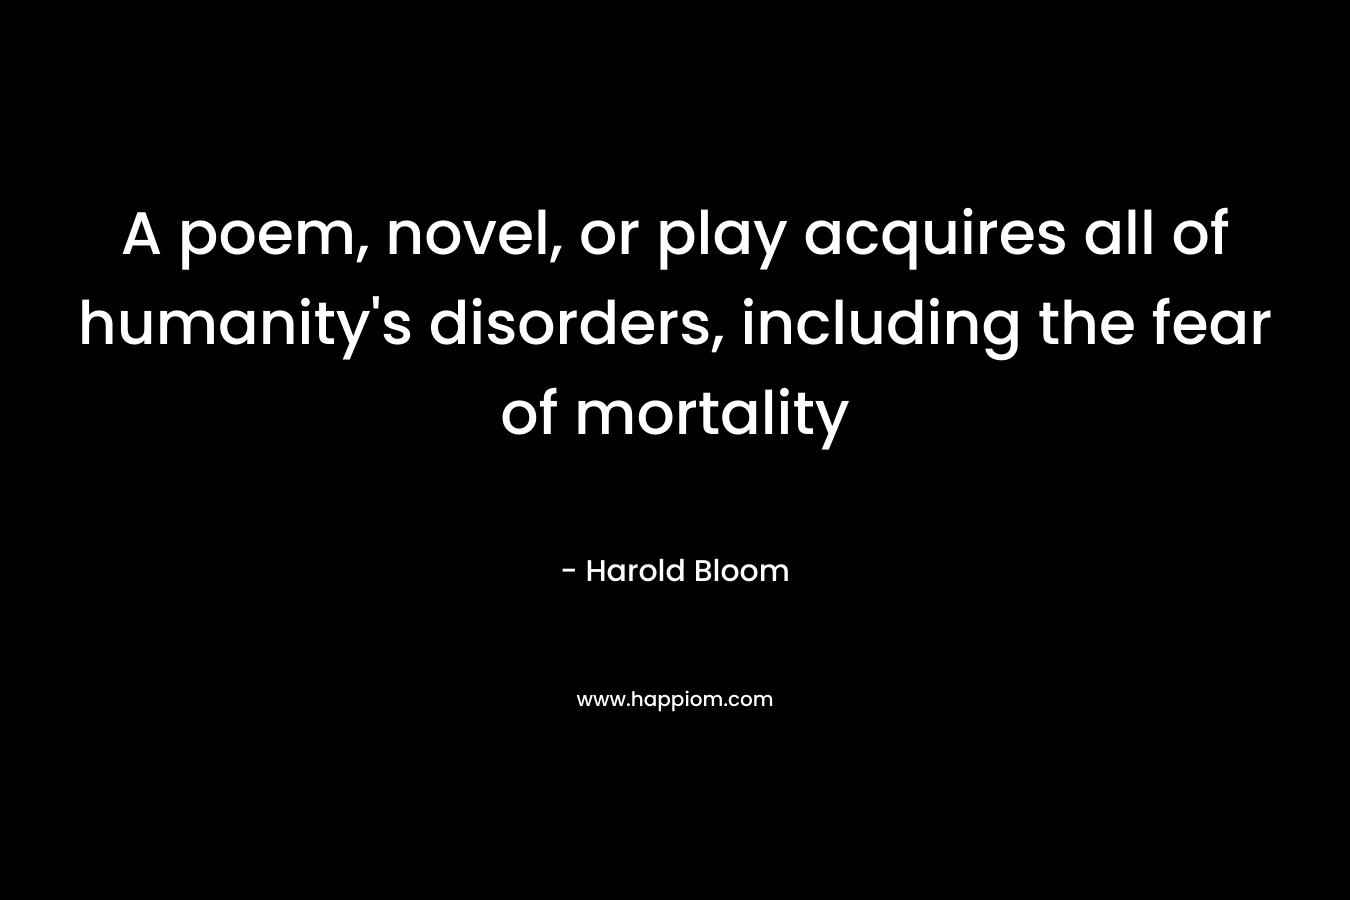 A poem, novel, or play acquires all of humanity’s disorders, including the fear of mortality – Harold Bloom